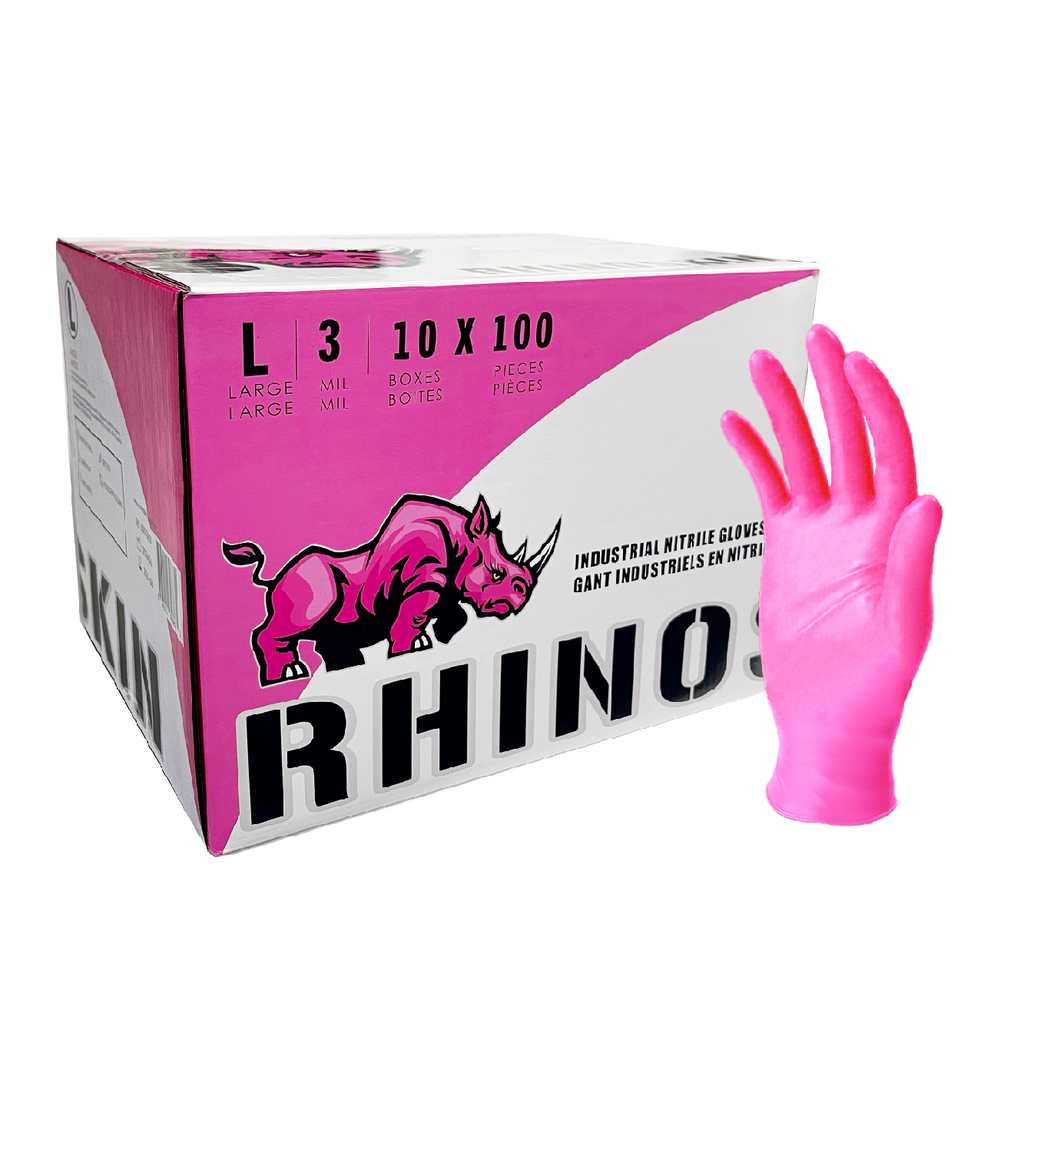 RhinoSkin Gloves 3mil - Case of 10 Boxes